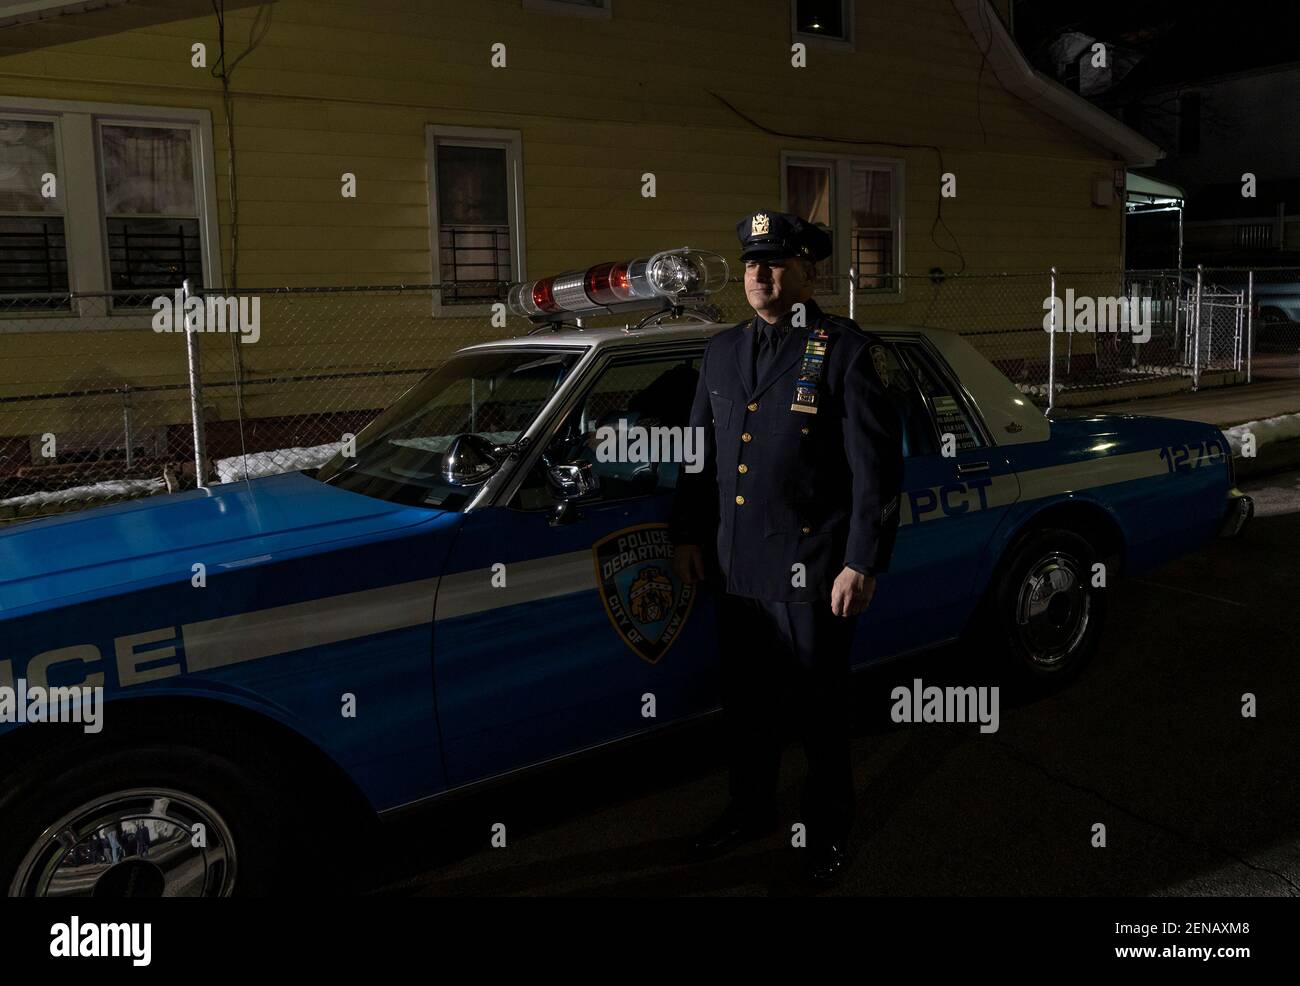 New York, United States. 26th Feb, 2021. Detective Caputo stands next to  police car Chevrolet Caprice similar that was used by Edward Byrne seen at  annual vigil for police officer Edward Byrne